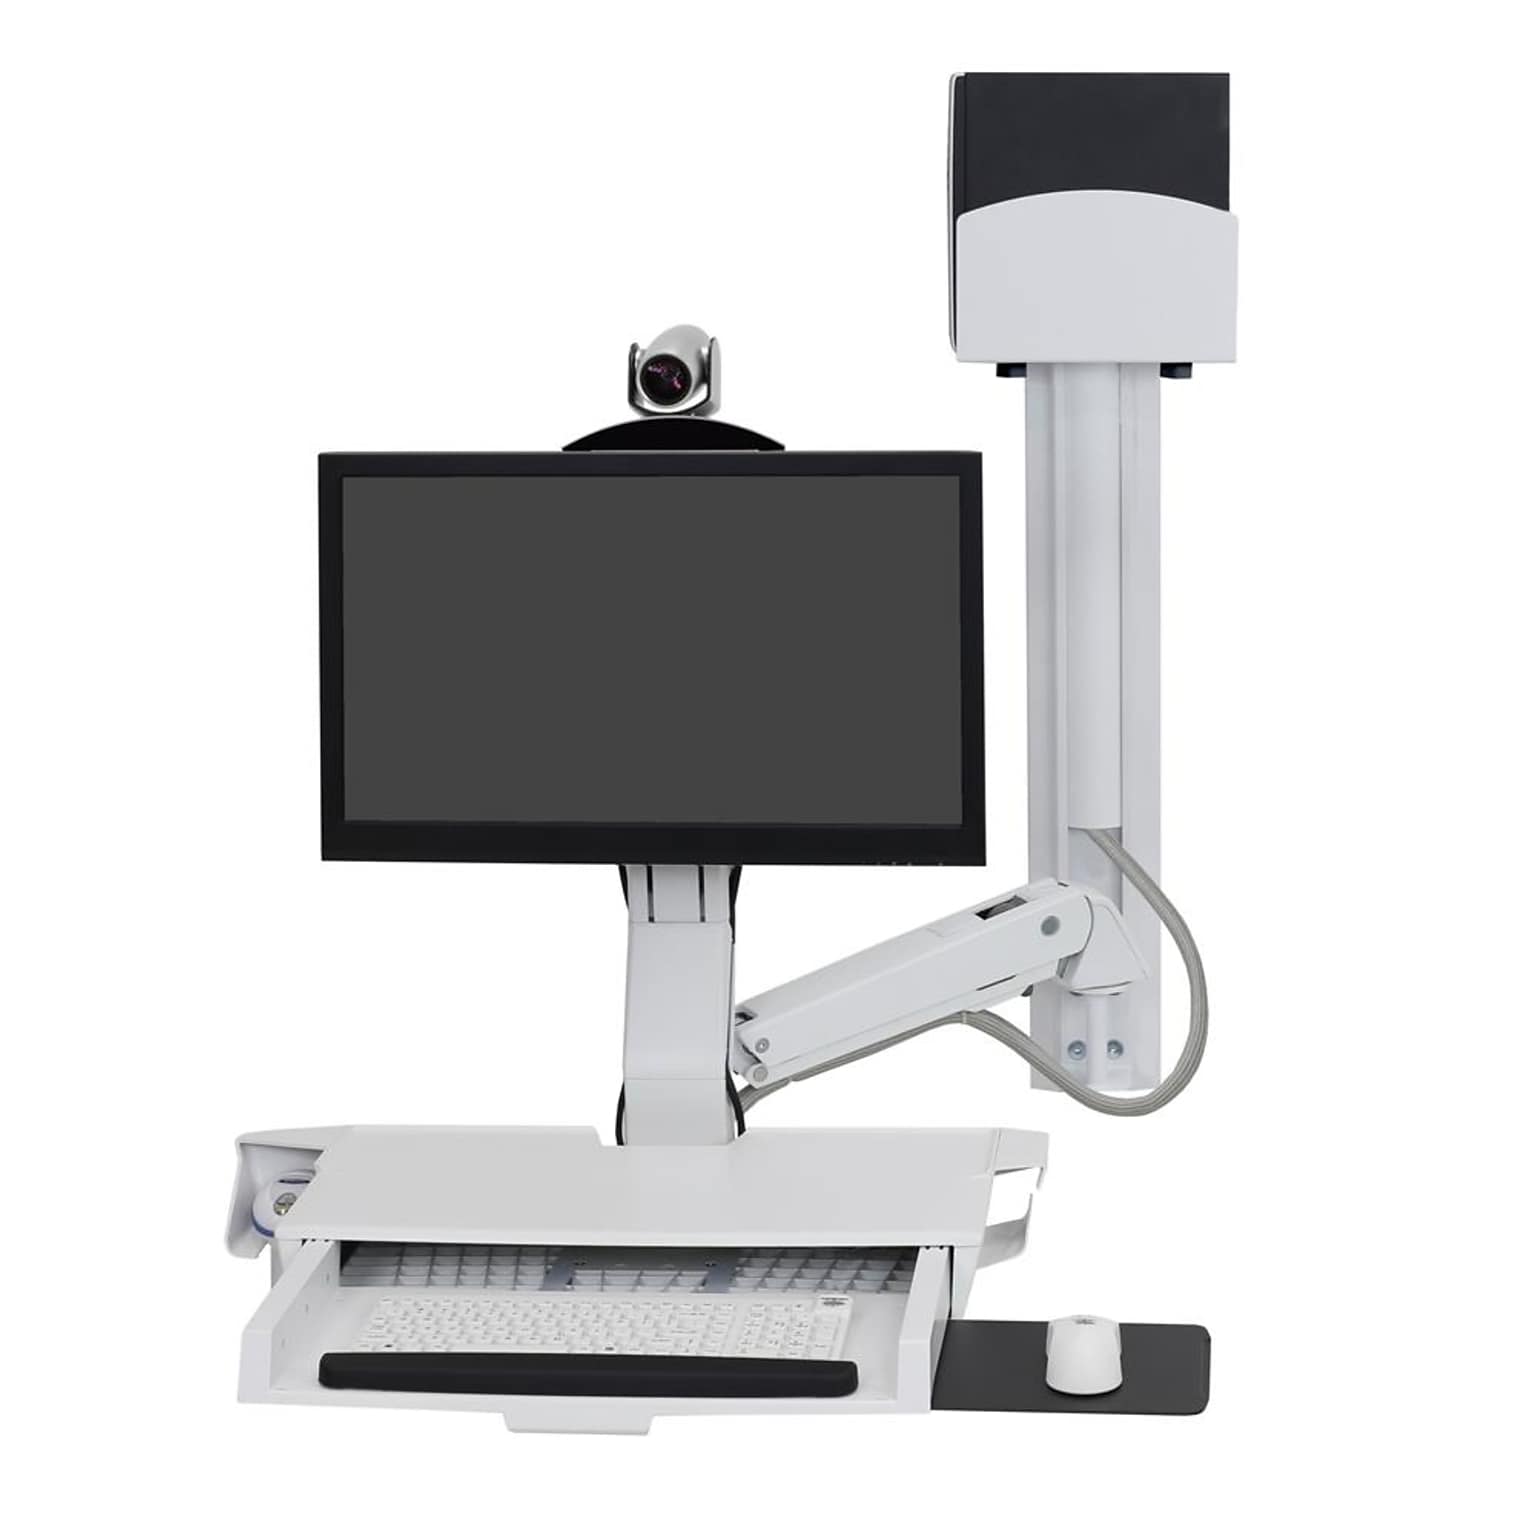 Ergotron SV Combo Adjustable Single Arm Worksurface & Pan, Small CPU Holder, 24 Screen Support, White (45-594-216)